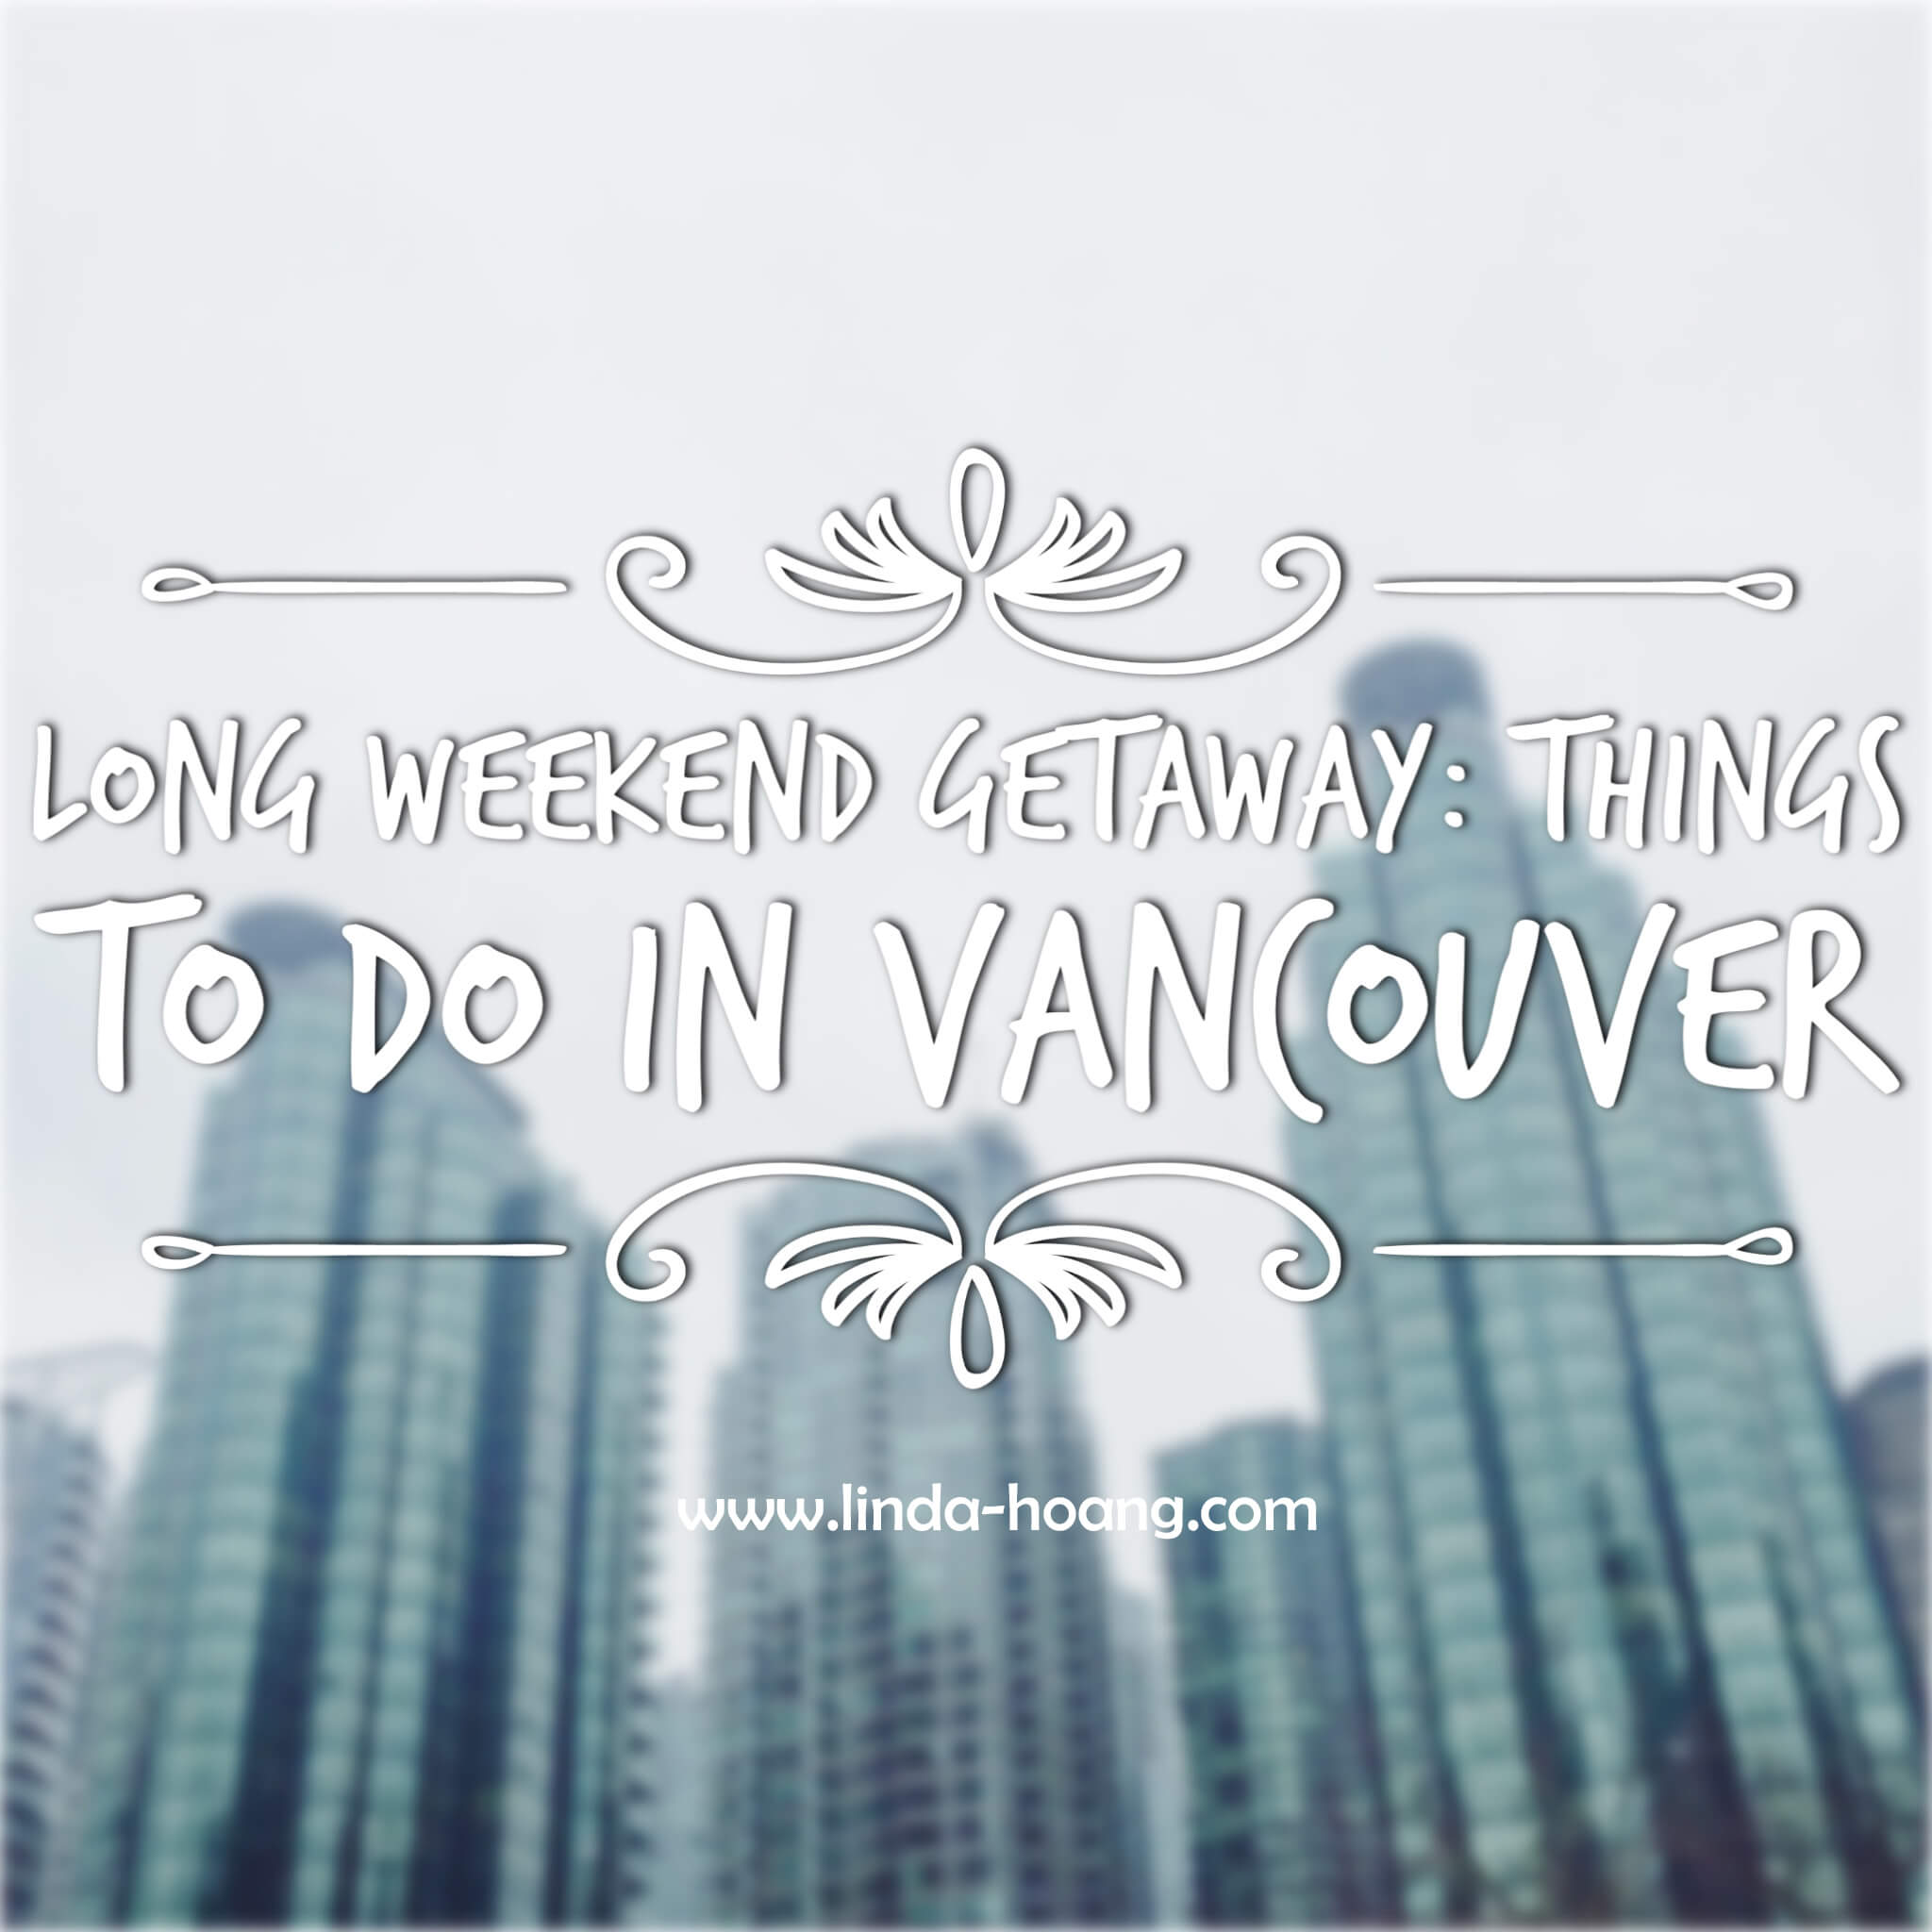 Things to do in Vancouver (Long Weekend)